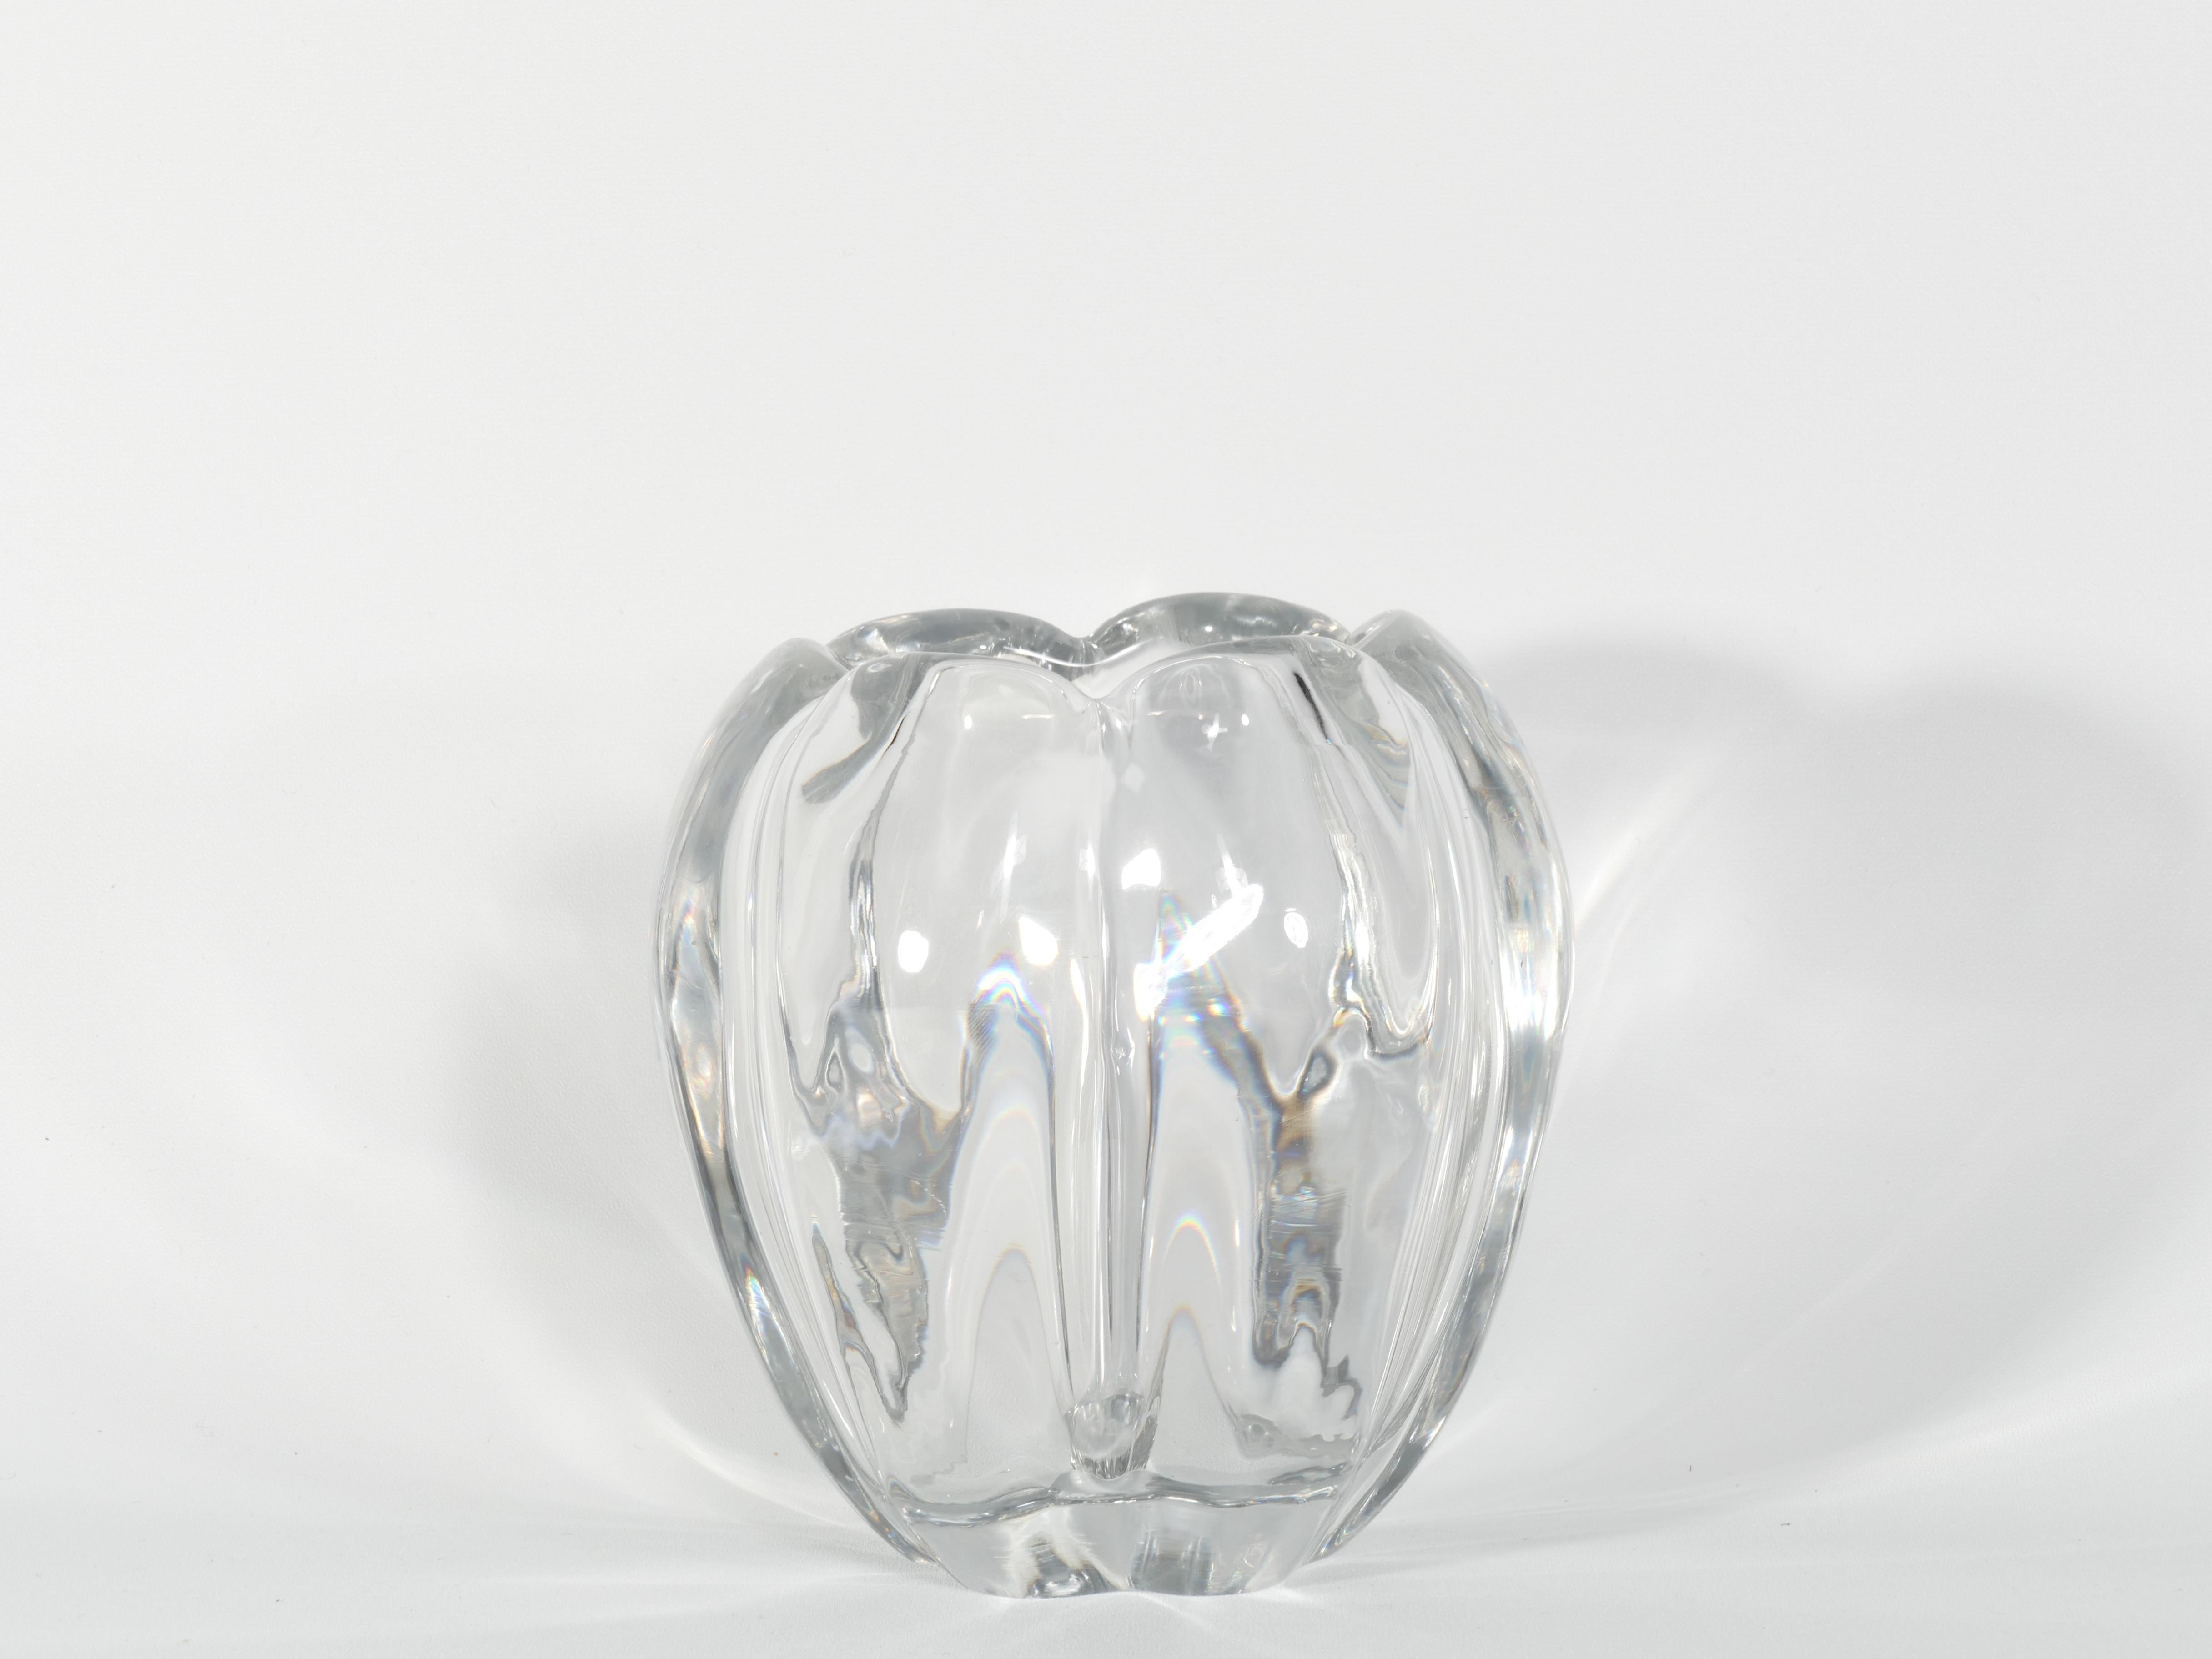 The Orrefors Stella Polaris Mouth Blown Crystal Vase, designed in 1936 by Vicke Lindstrand for Orrefors, is an exquisite example of vintage art glass. This vase, with its organic star shape, is crafted from mouth-blown crystal and bears the artist's